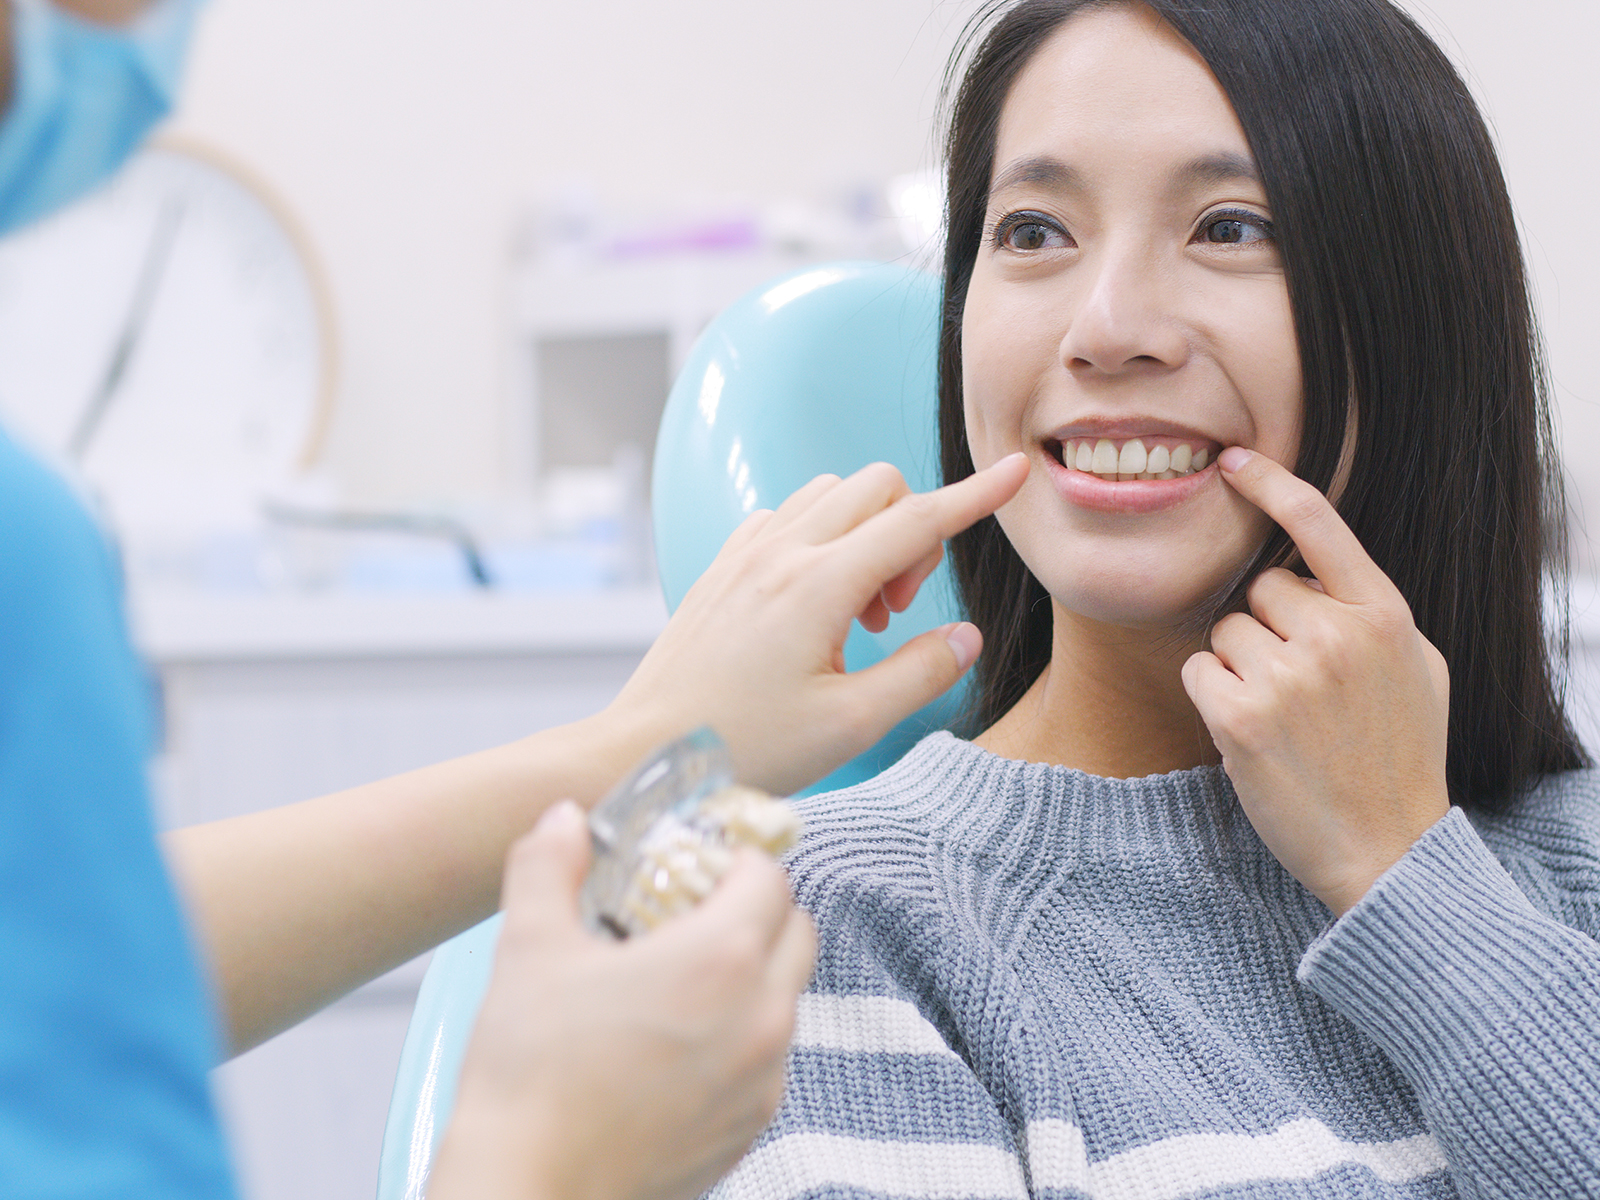 5 Tips To Help Your Dental Crowns Last Longer